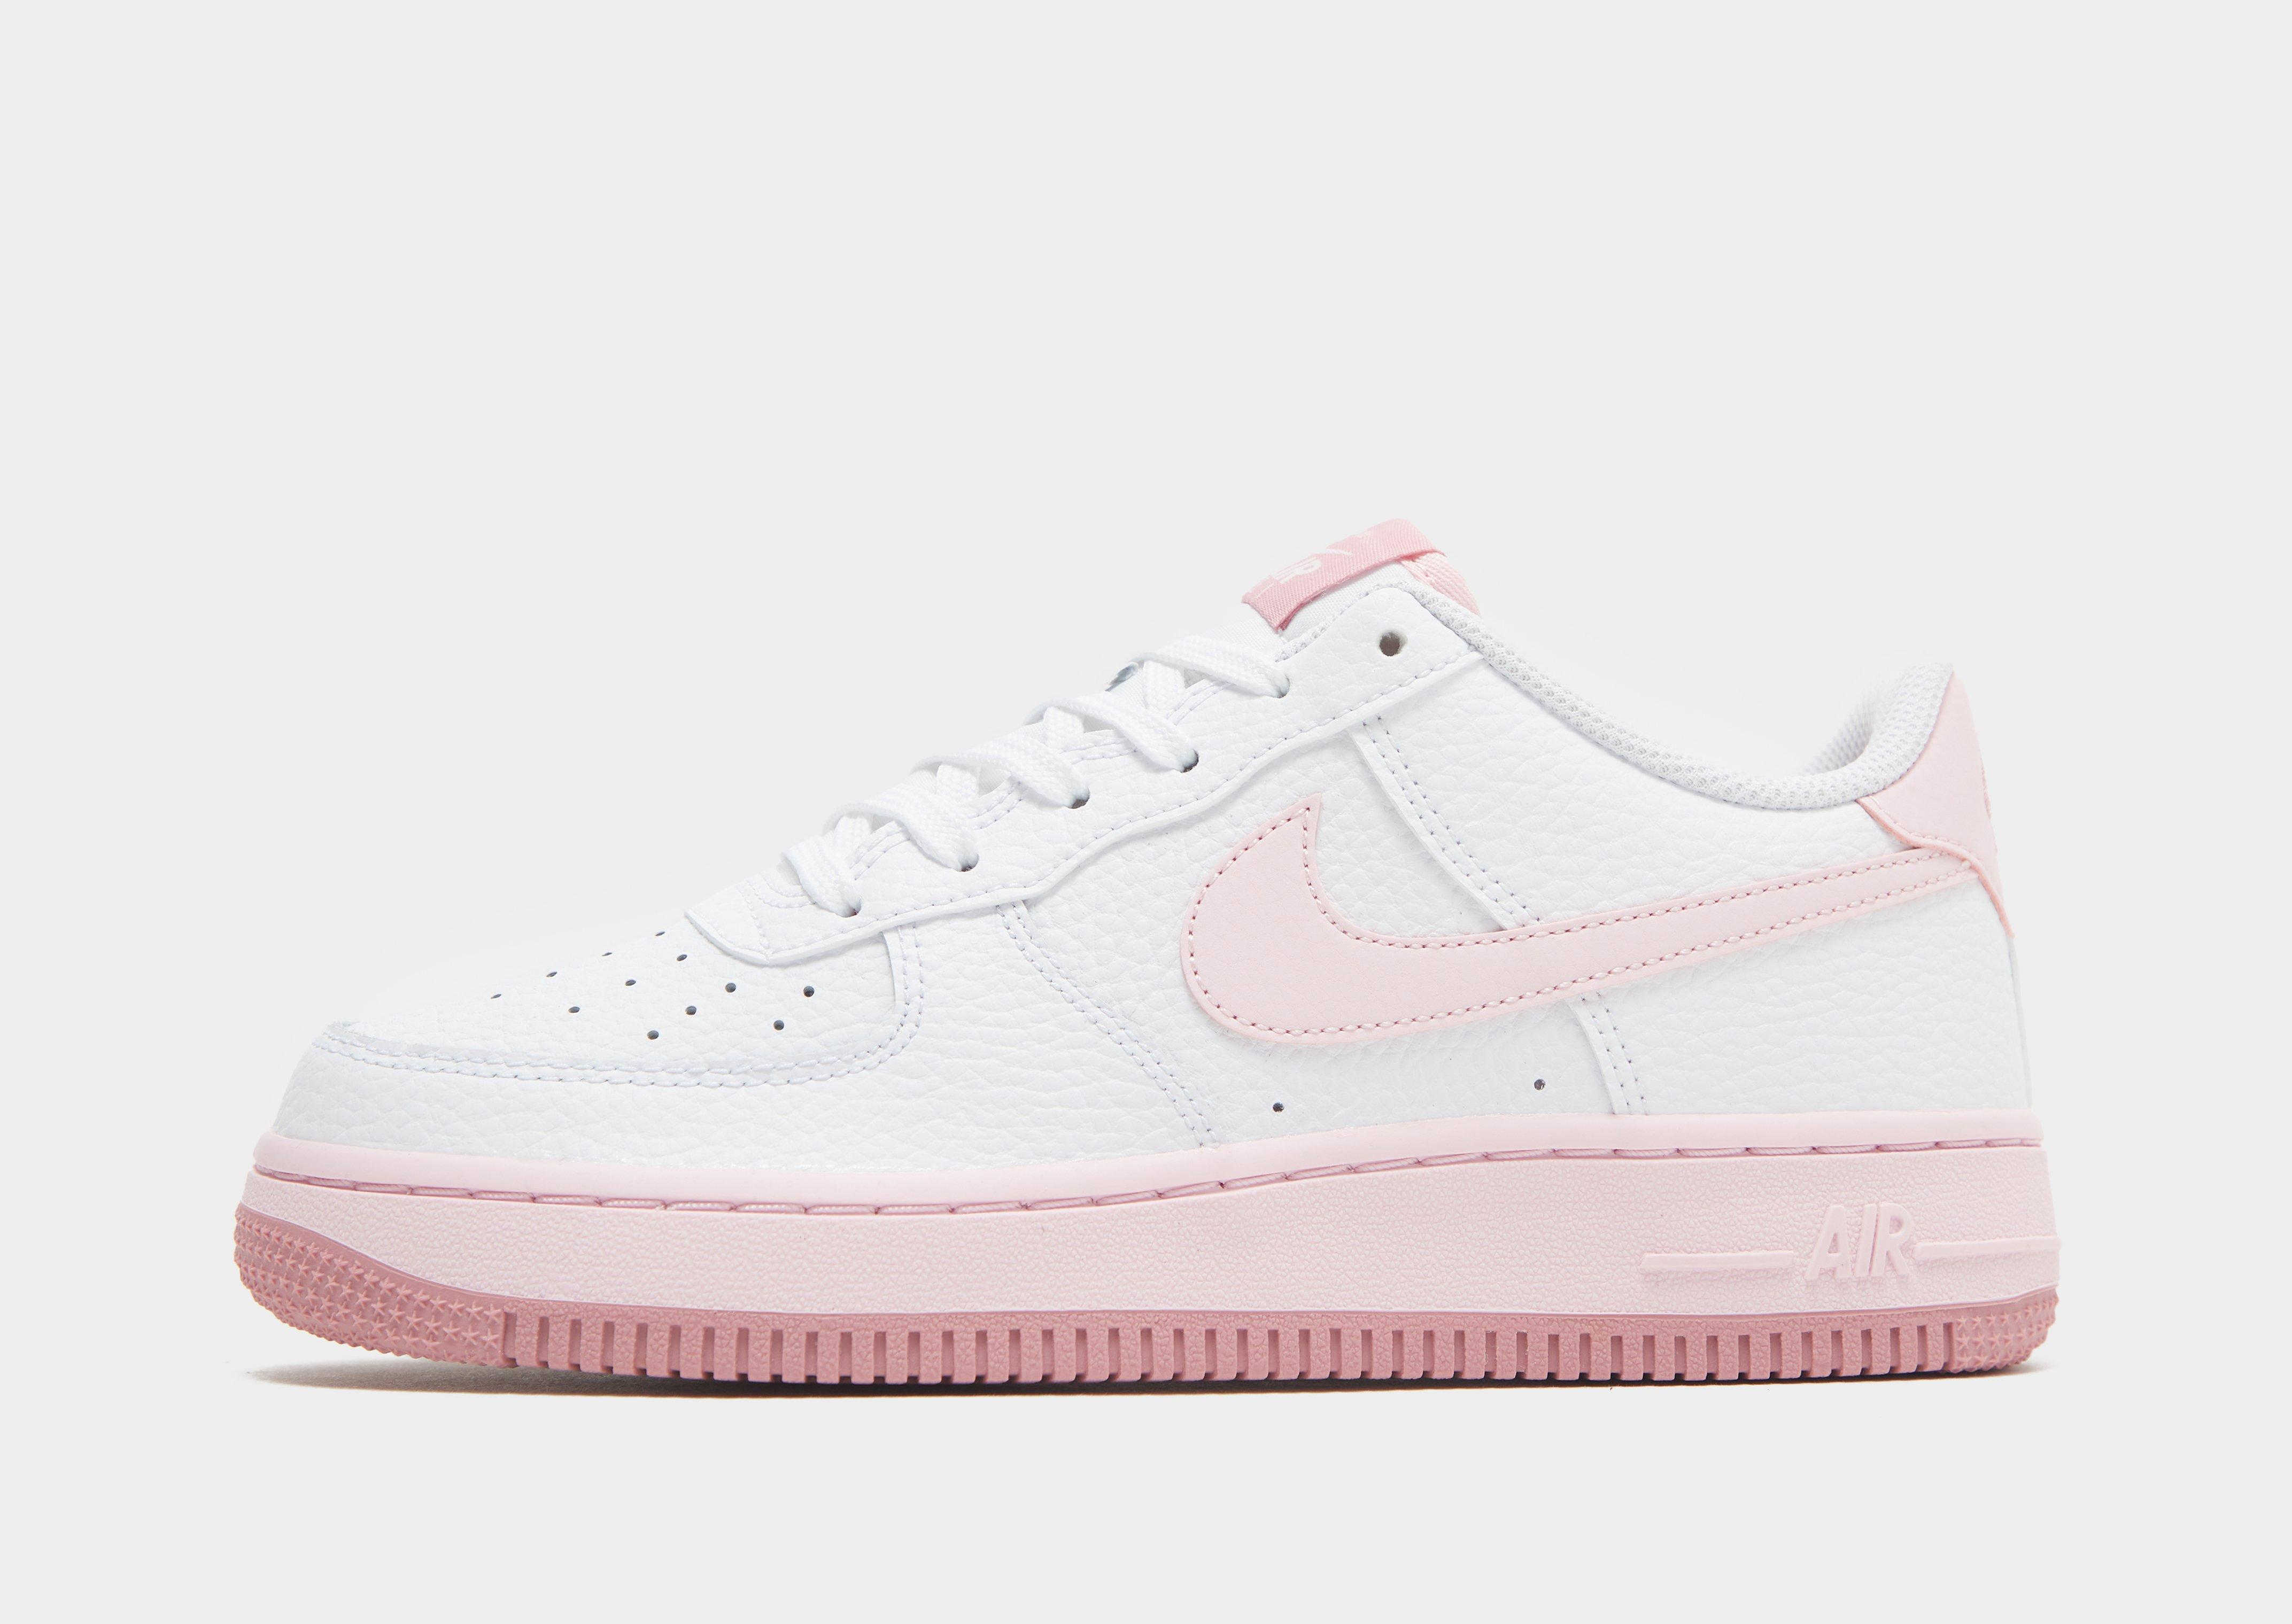 white & pink air force 1 trainers junior